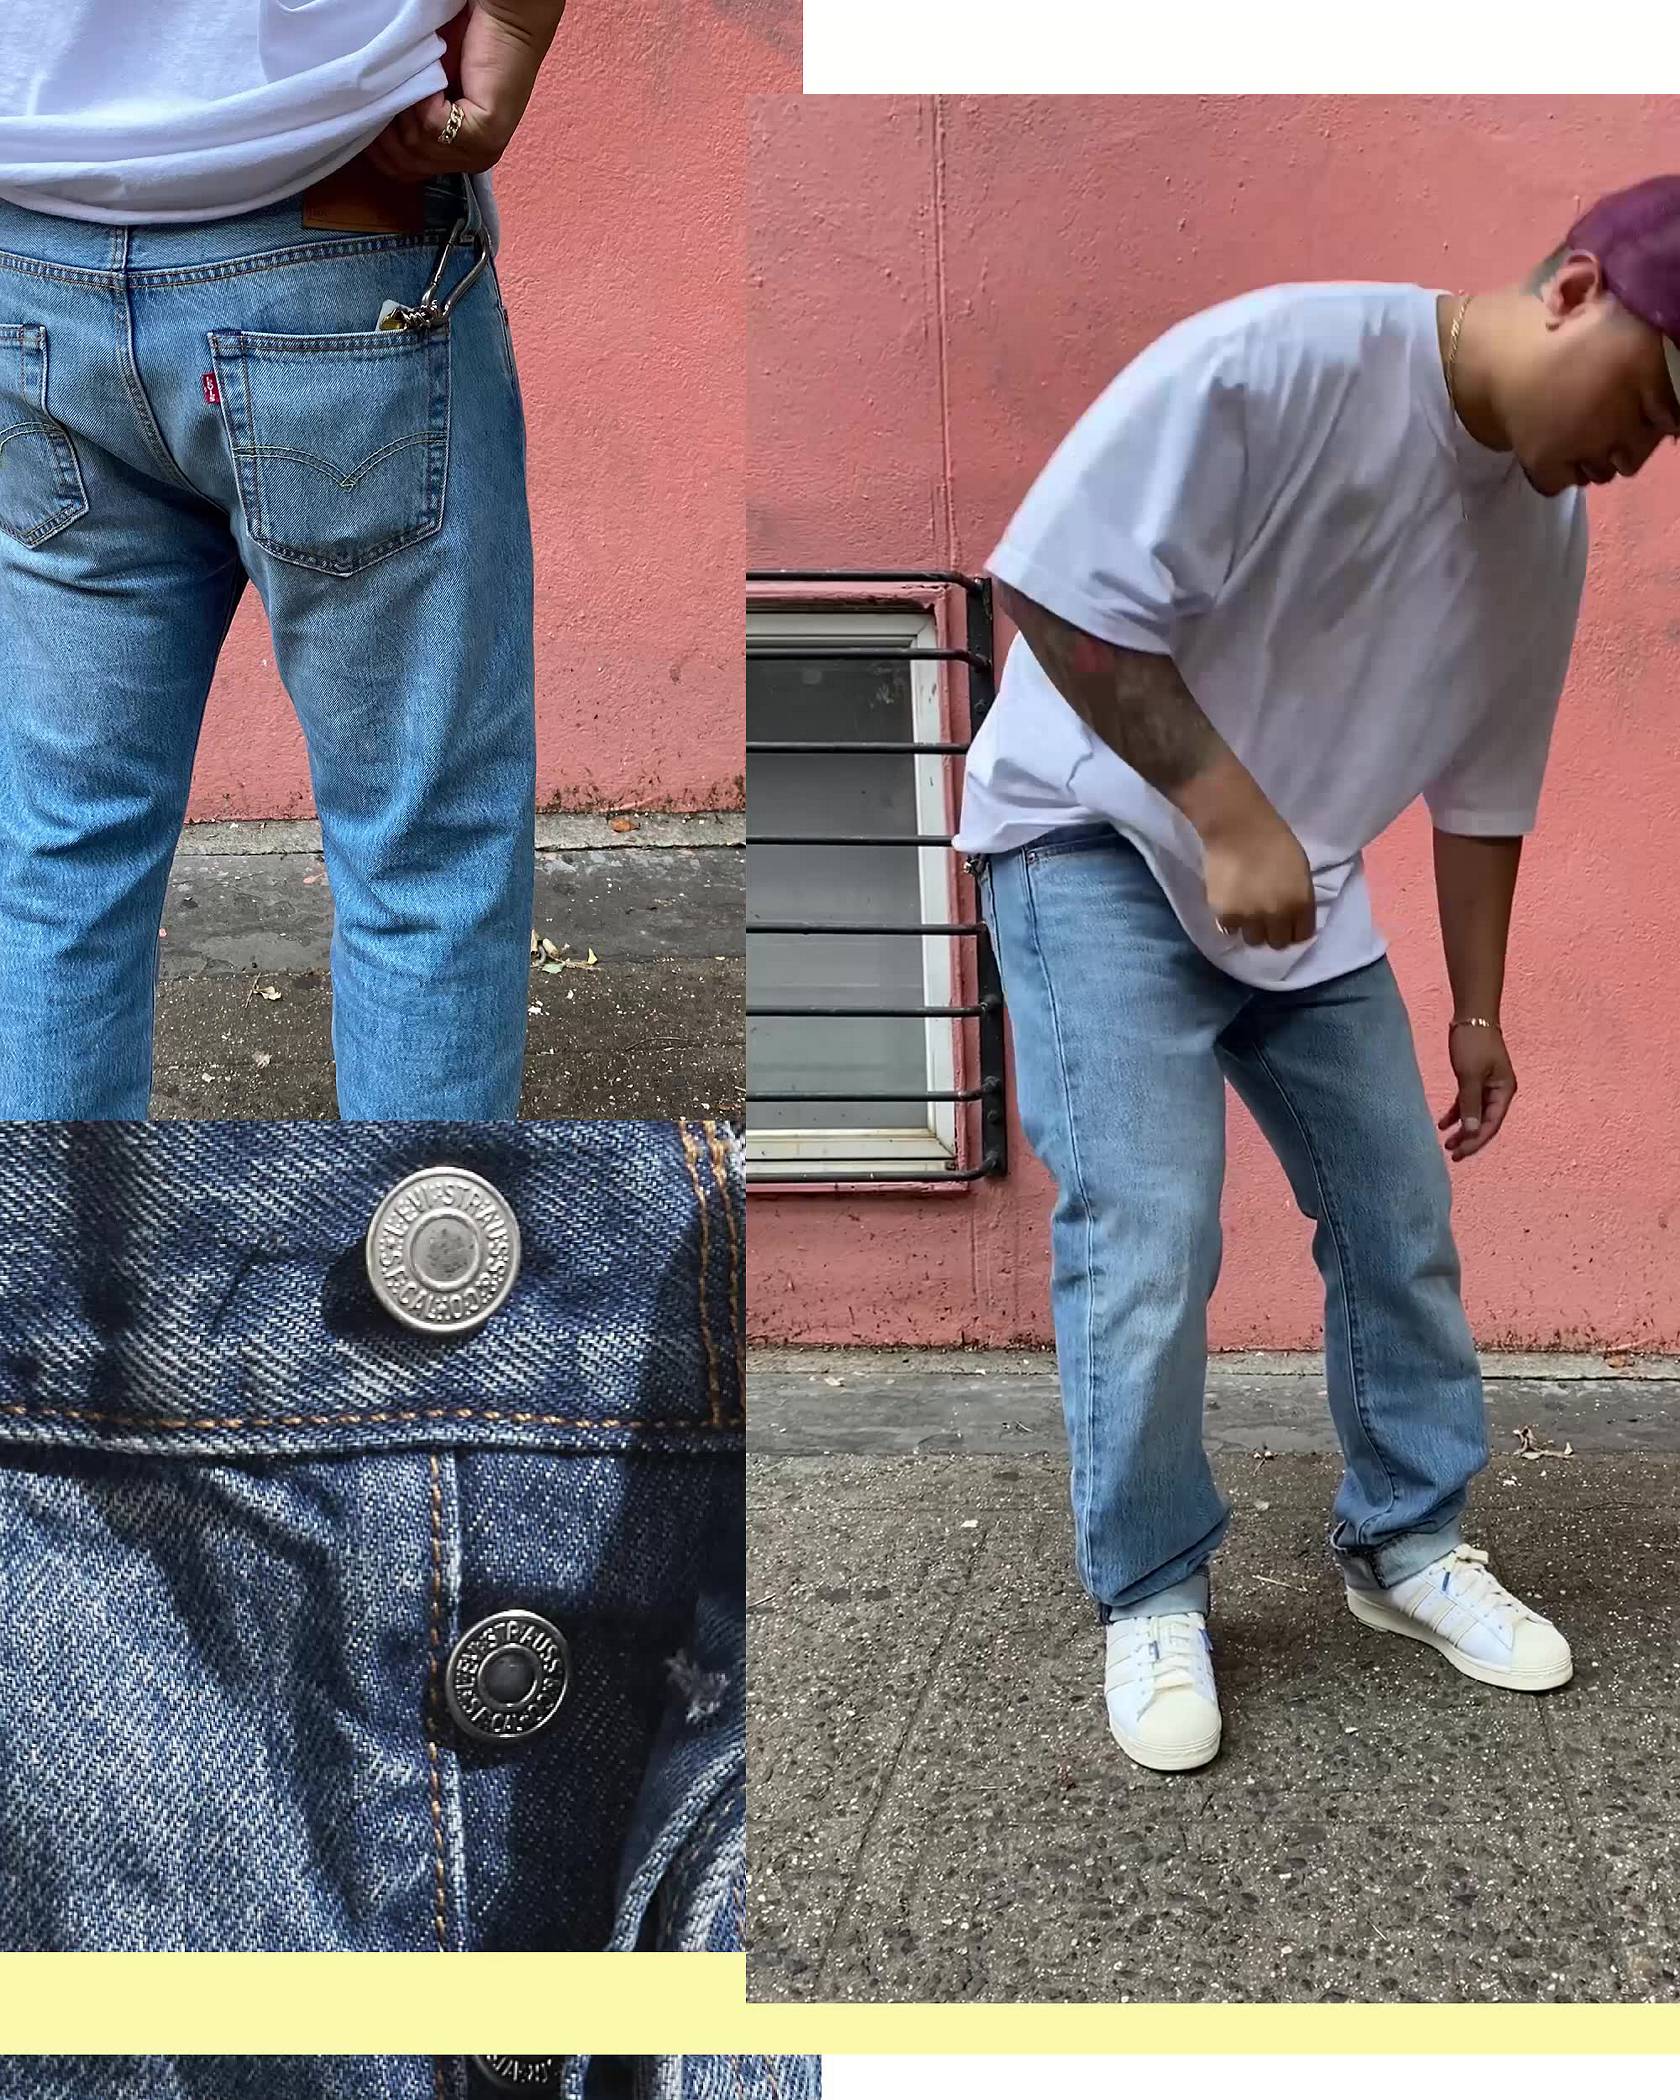 Phillip Leyesa Wearing his Levi's 501 Jeans before his customization process.